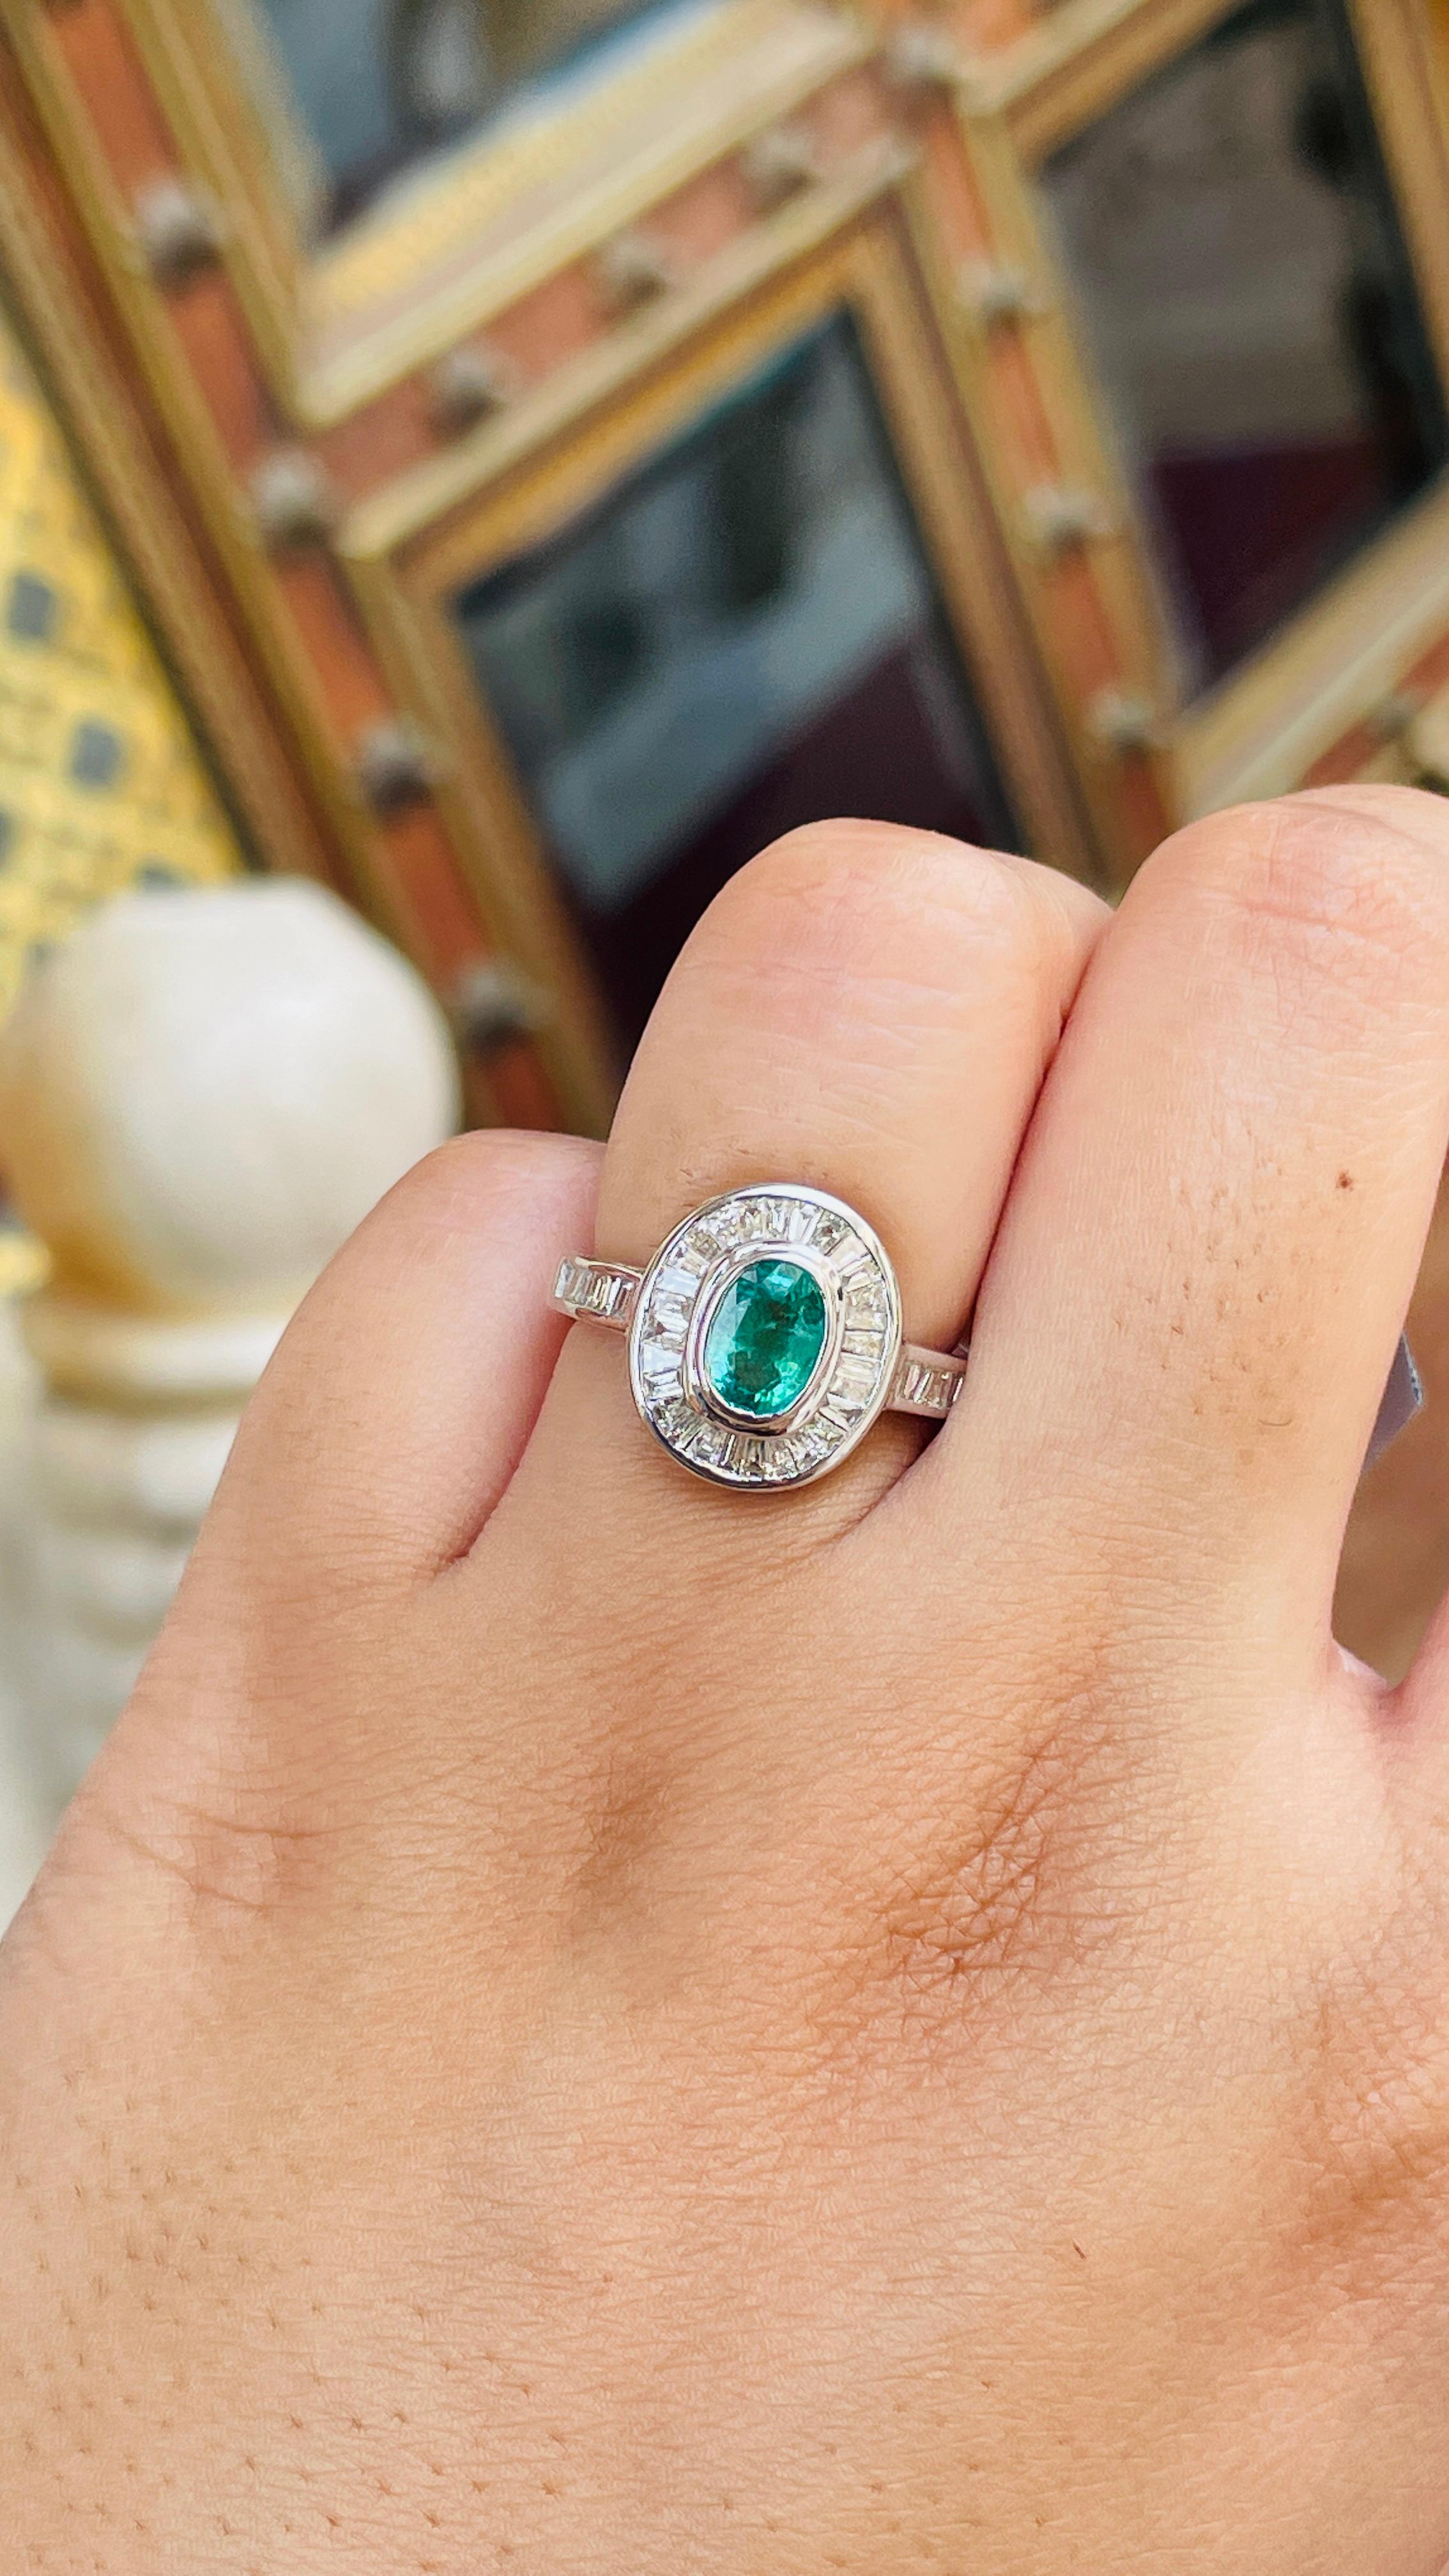 For Sale:  1.56 Carat Emerald Cocktail Ring with Halo of Diamonds in 18K White Gold  2